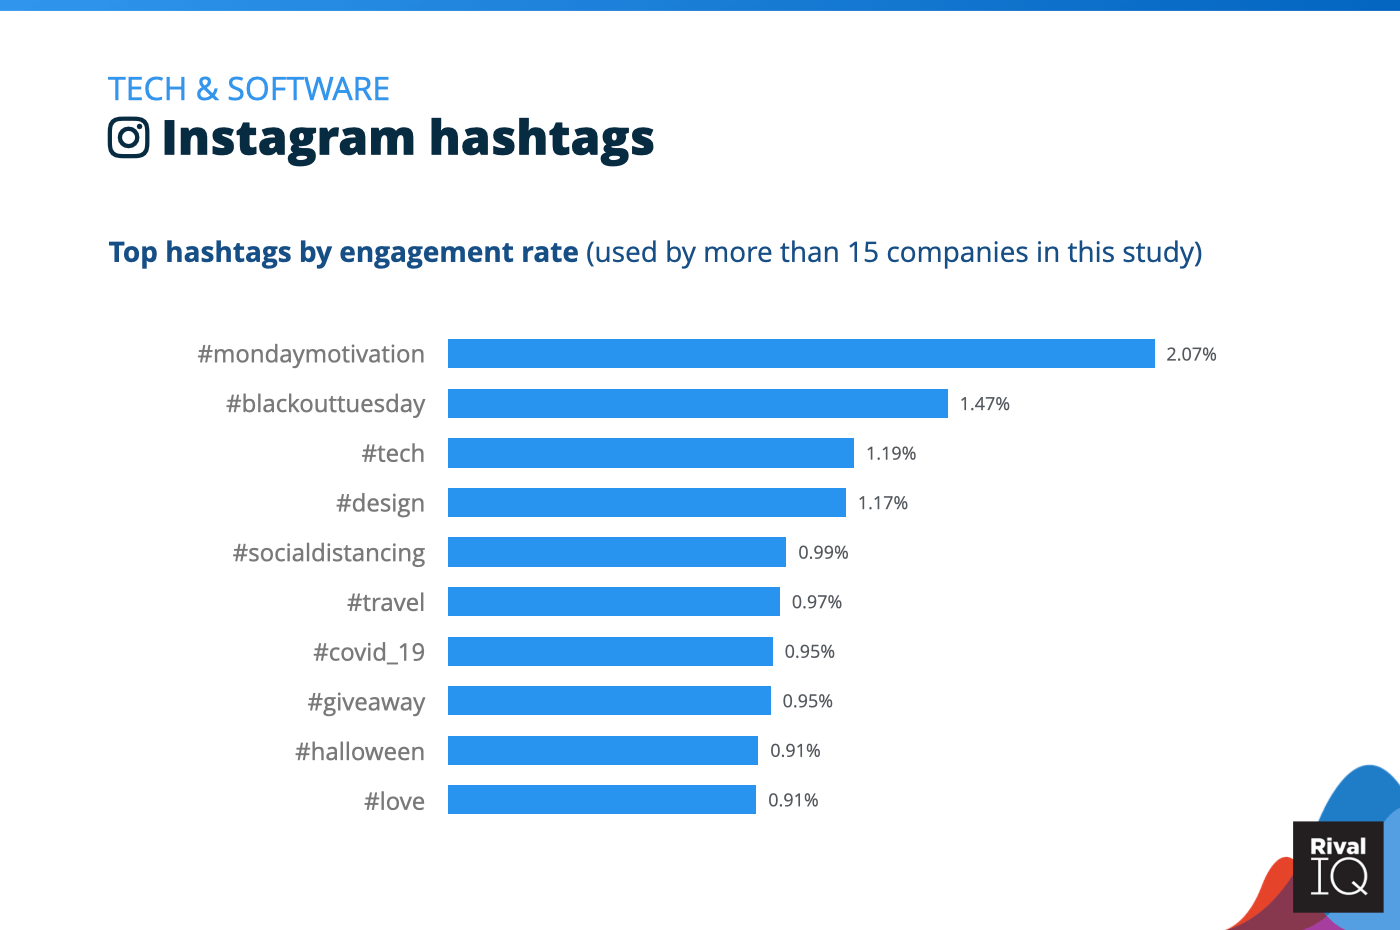 Chart of Top Instagram hashtags by engagement rate, Tech & Software